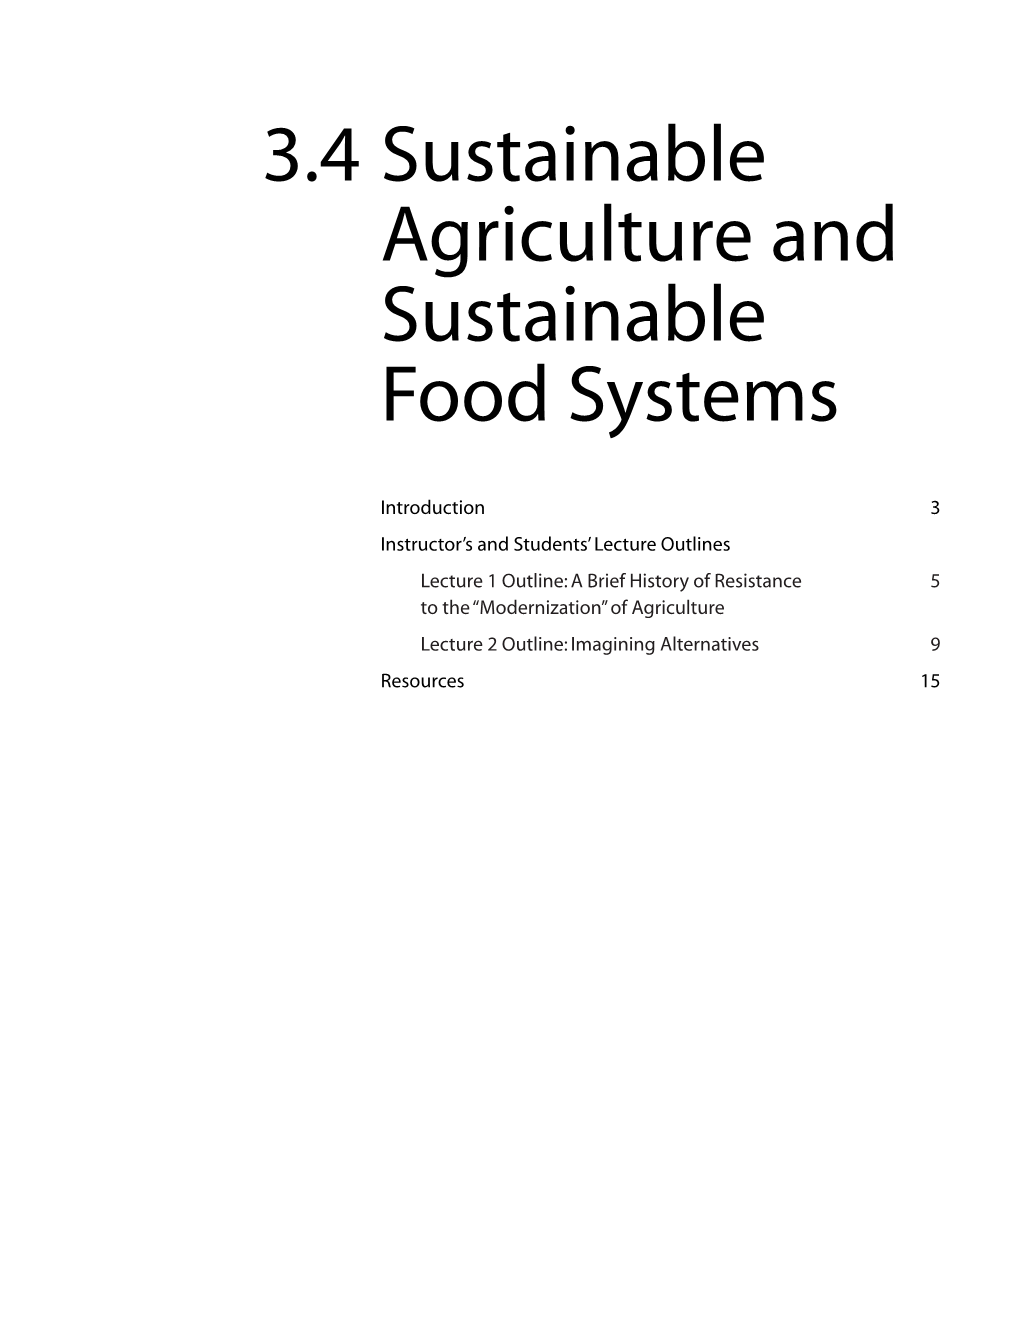 3.4 Sustainable Agriculture and Sustainable Food Systems